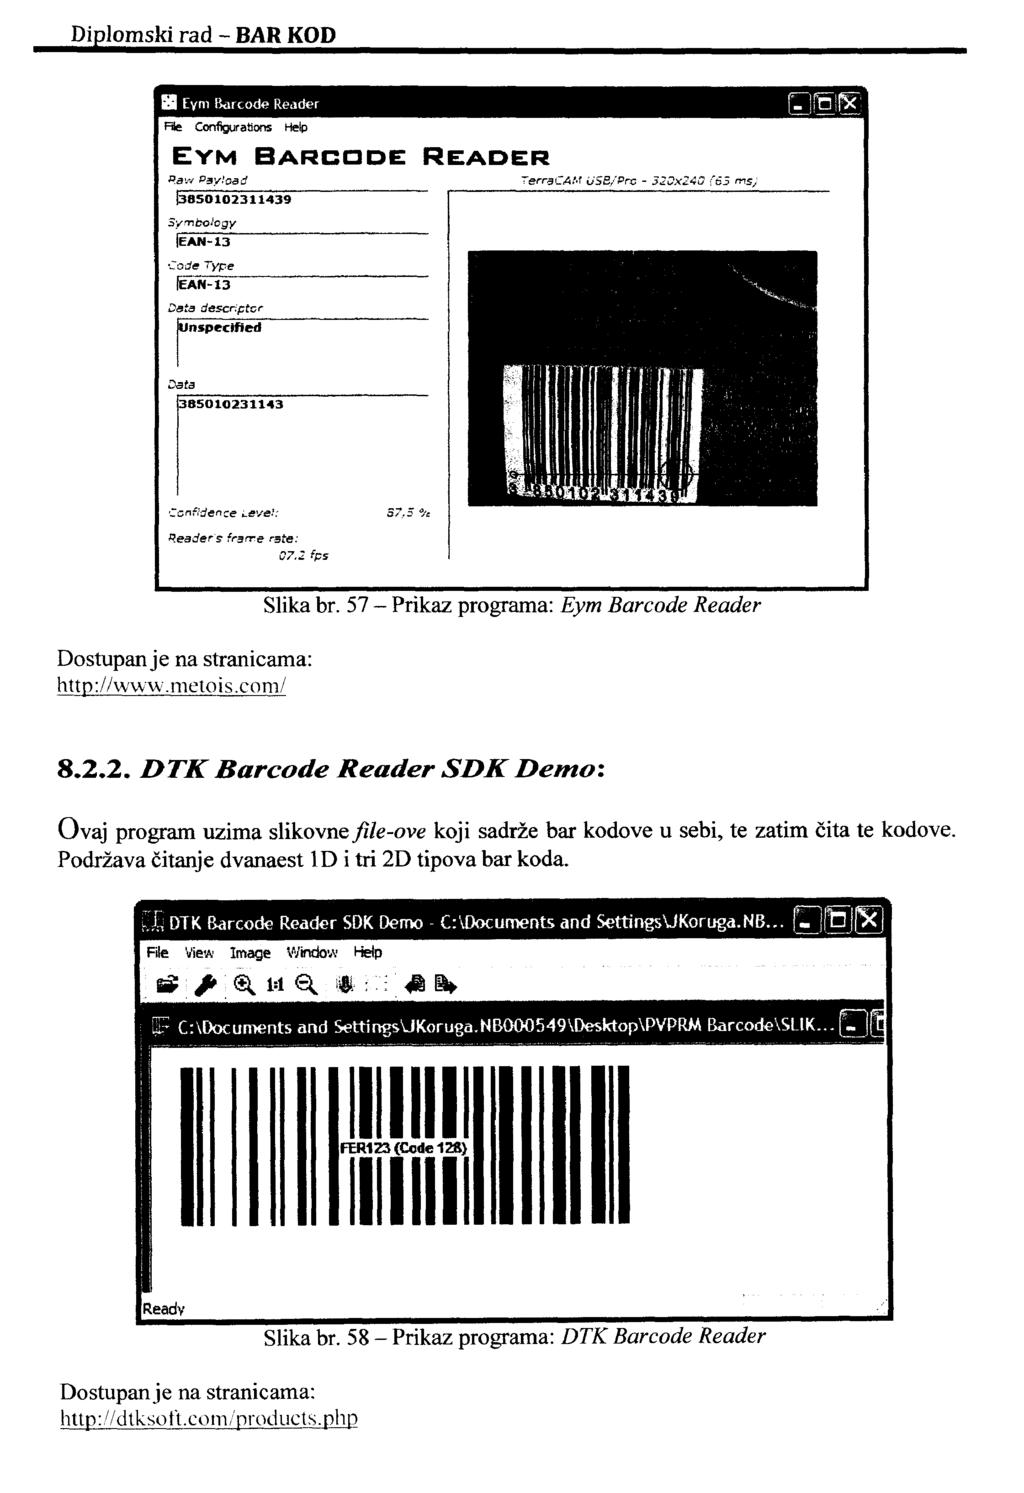 Eym Barcode Reader Hie Configurations Help Eym Barcode Reader Paw Pay!